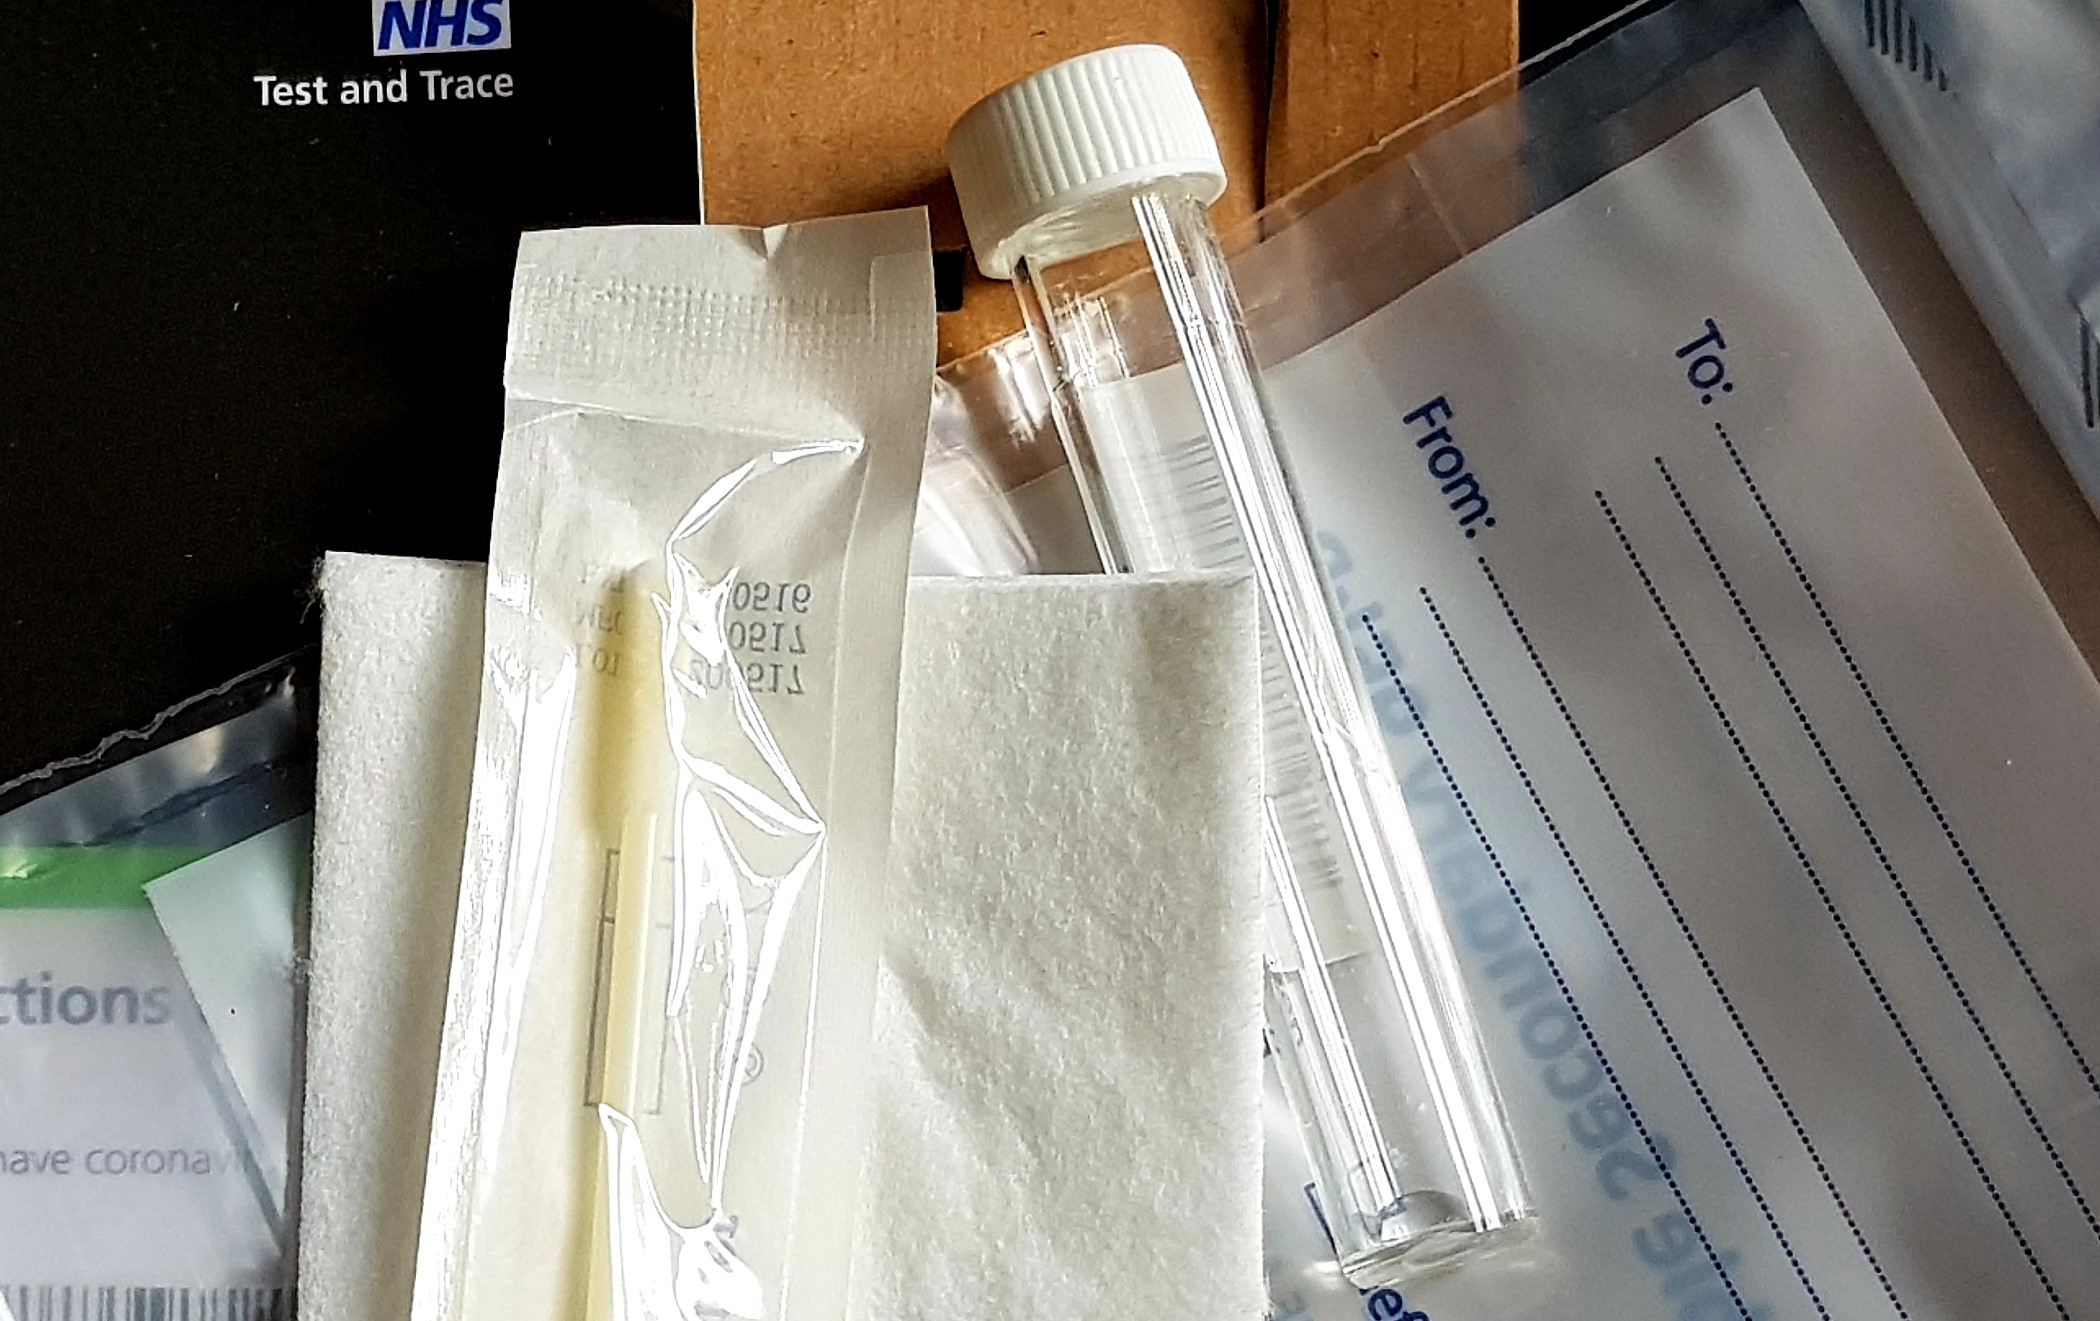 How do the Covid-19 saliva tests stack up? – Expert Reaction